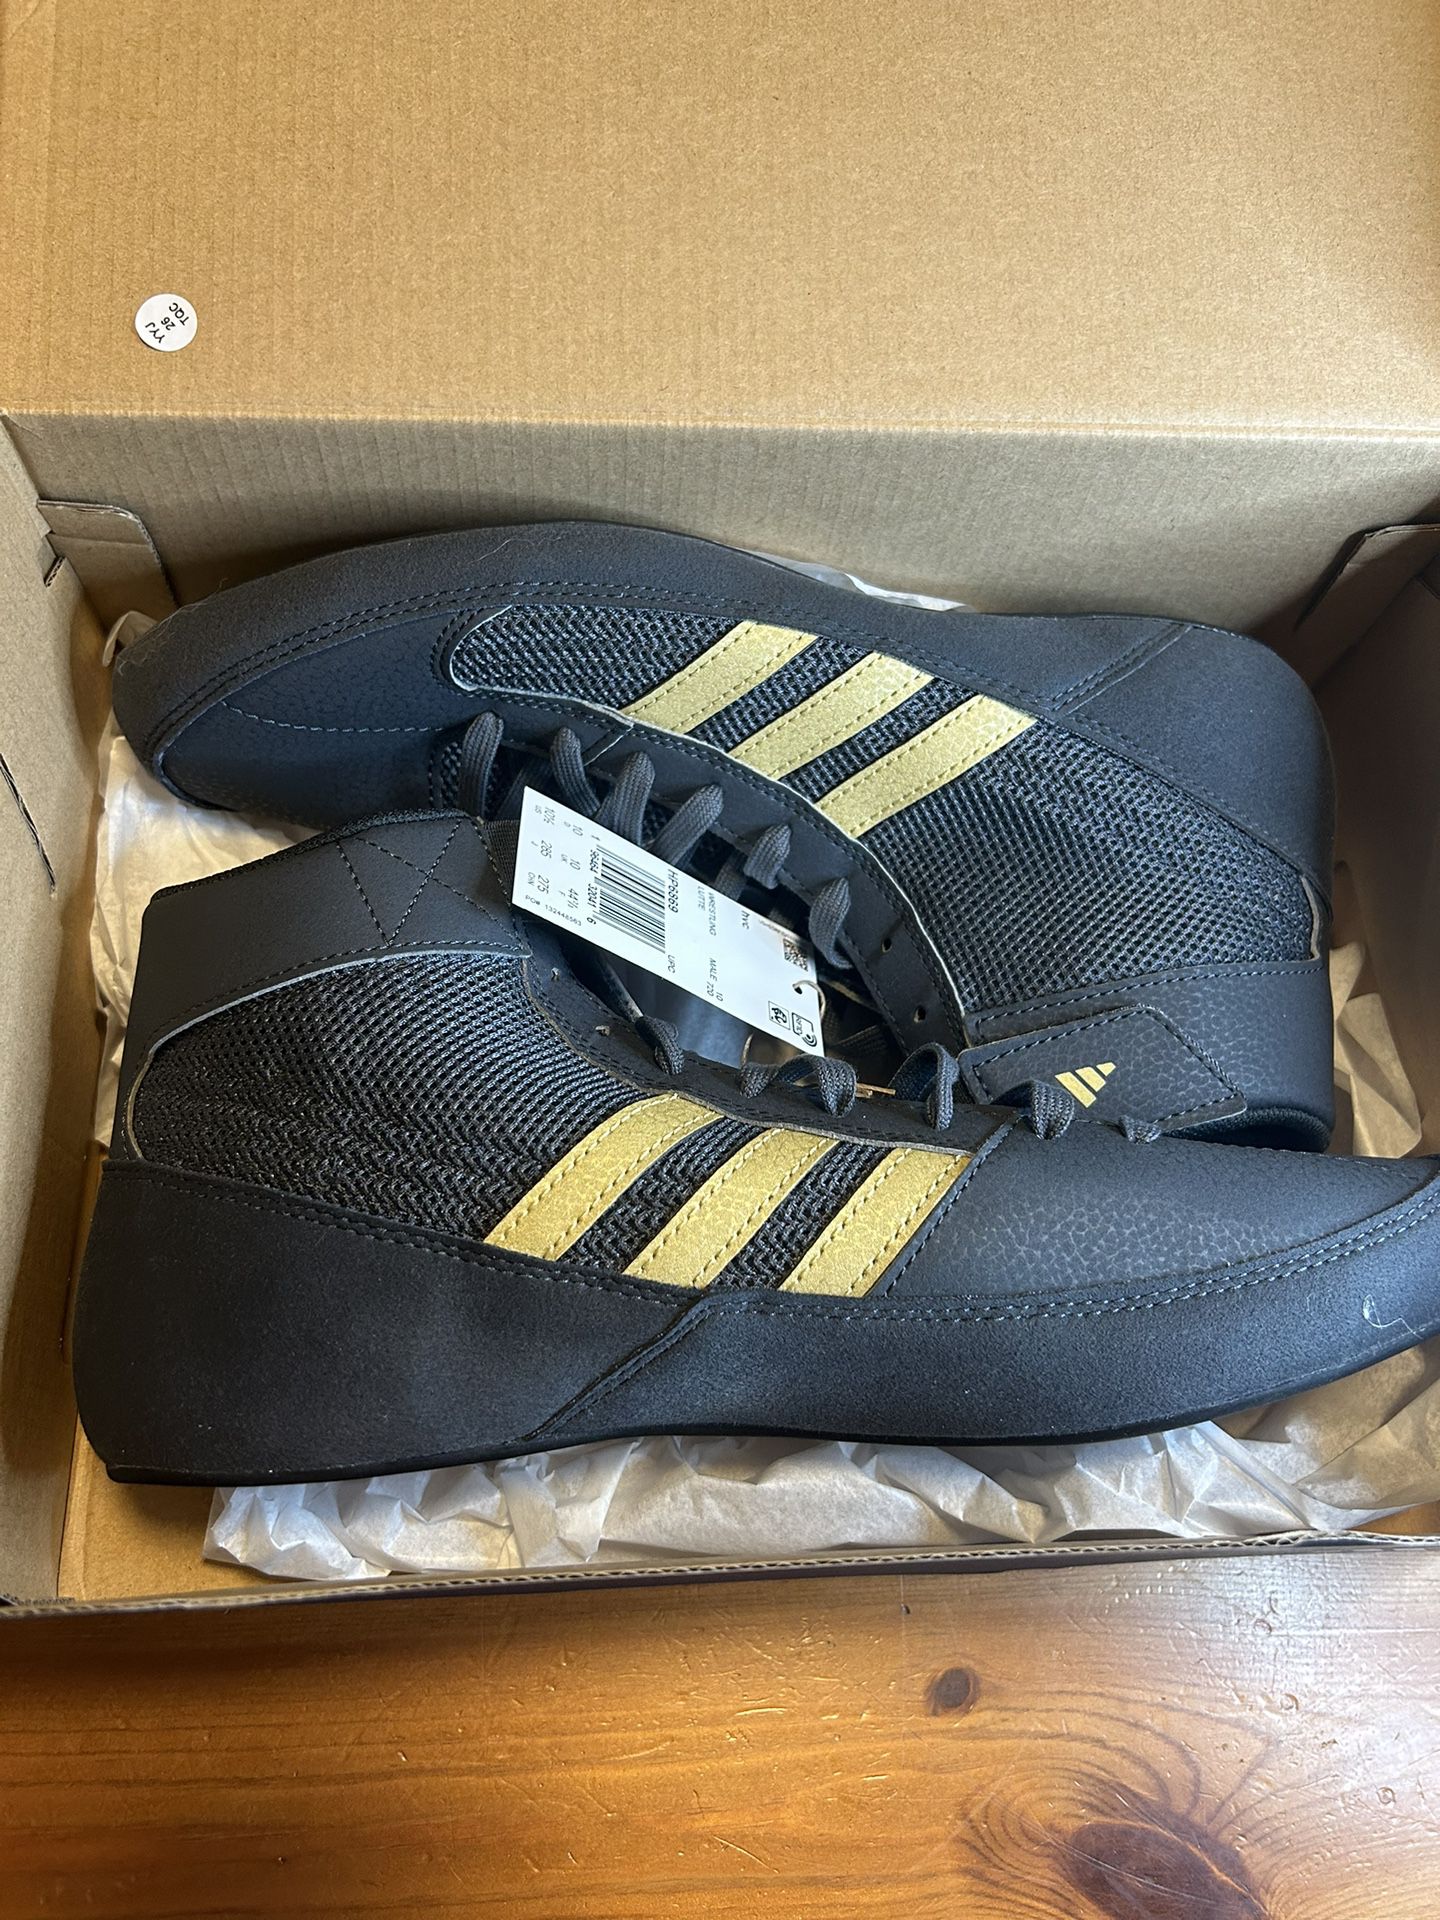 Size 10 1/2 Men’s Adidas Wrestling Shoes !BRAND NEW! 